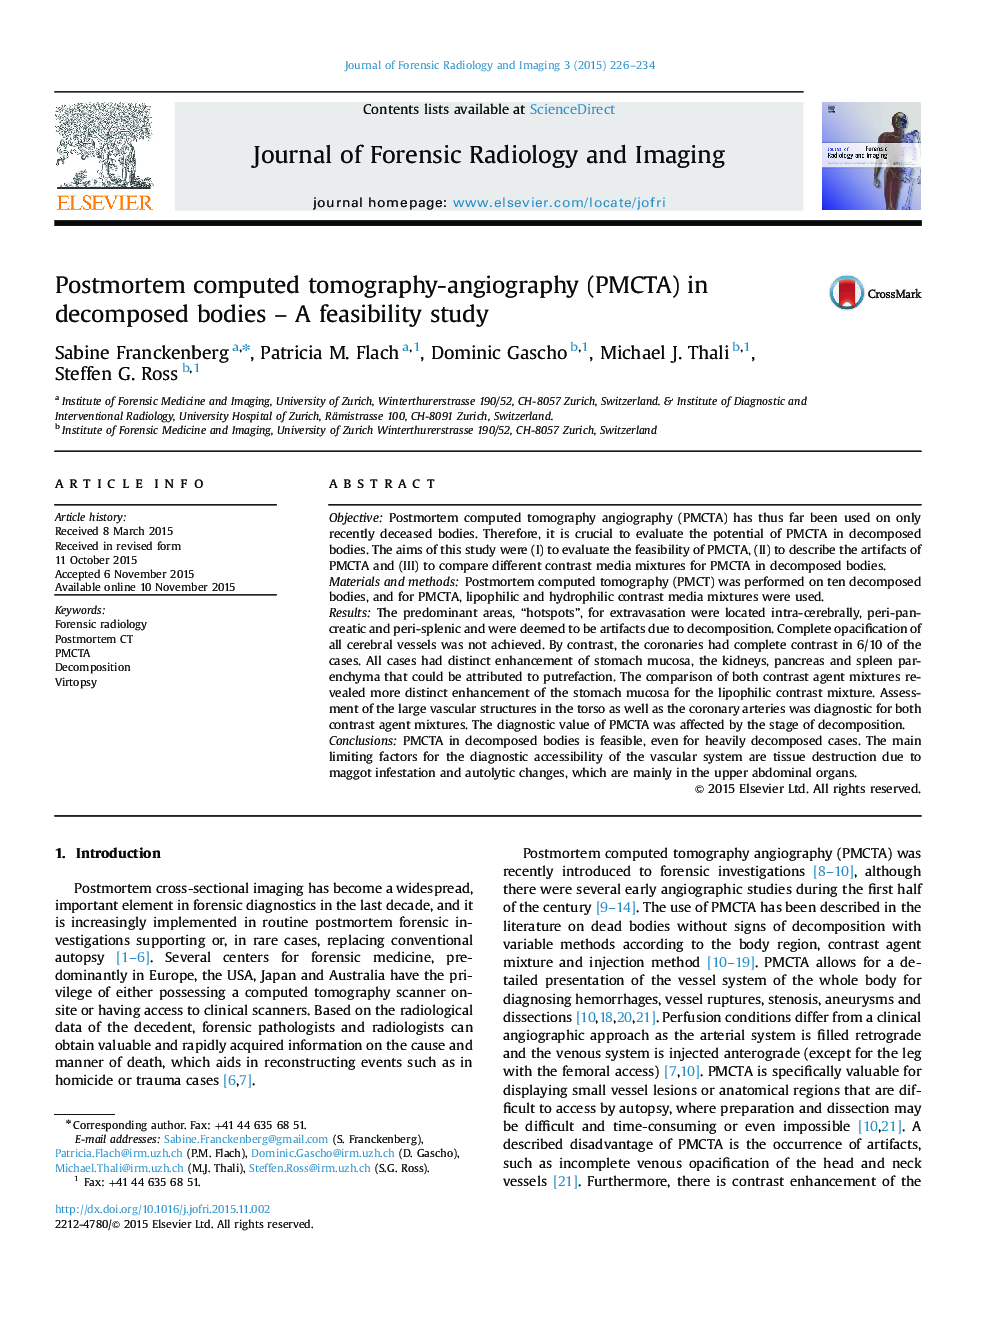 Postmortem computed tomography-angiography (PMCTA) in decomposed bodies – A feasibility study